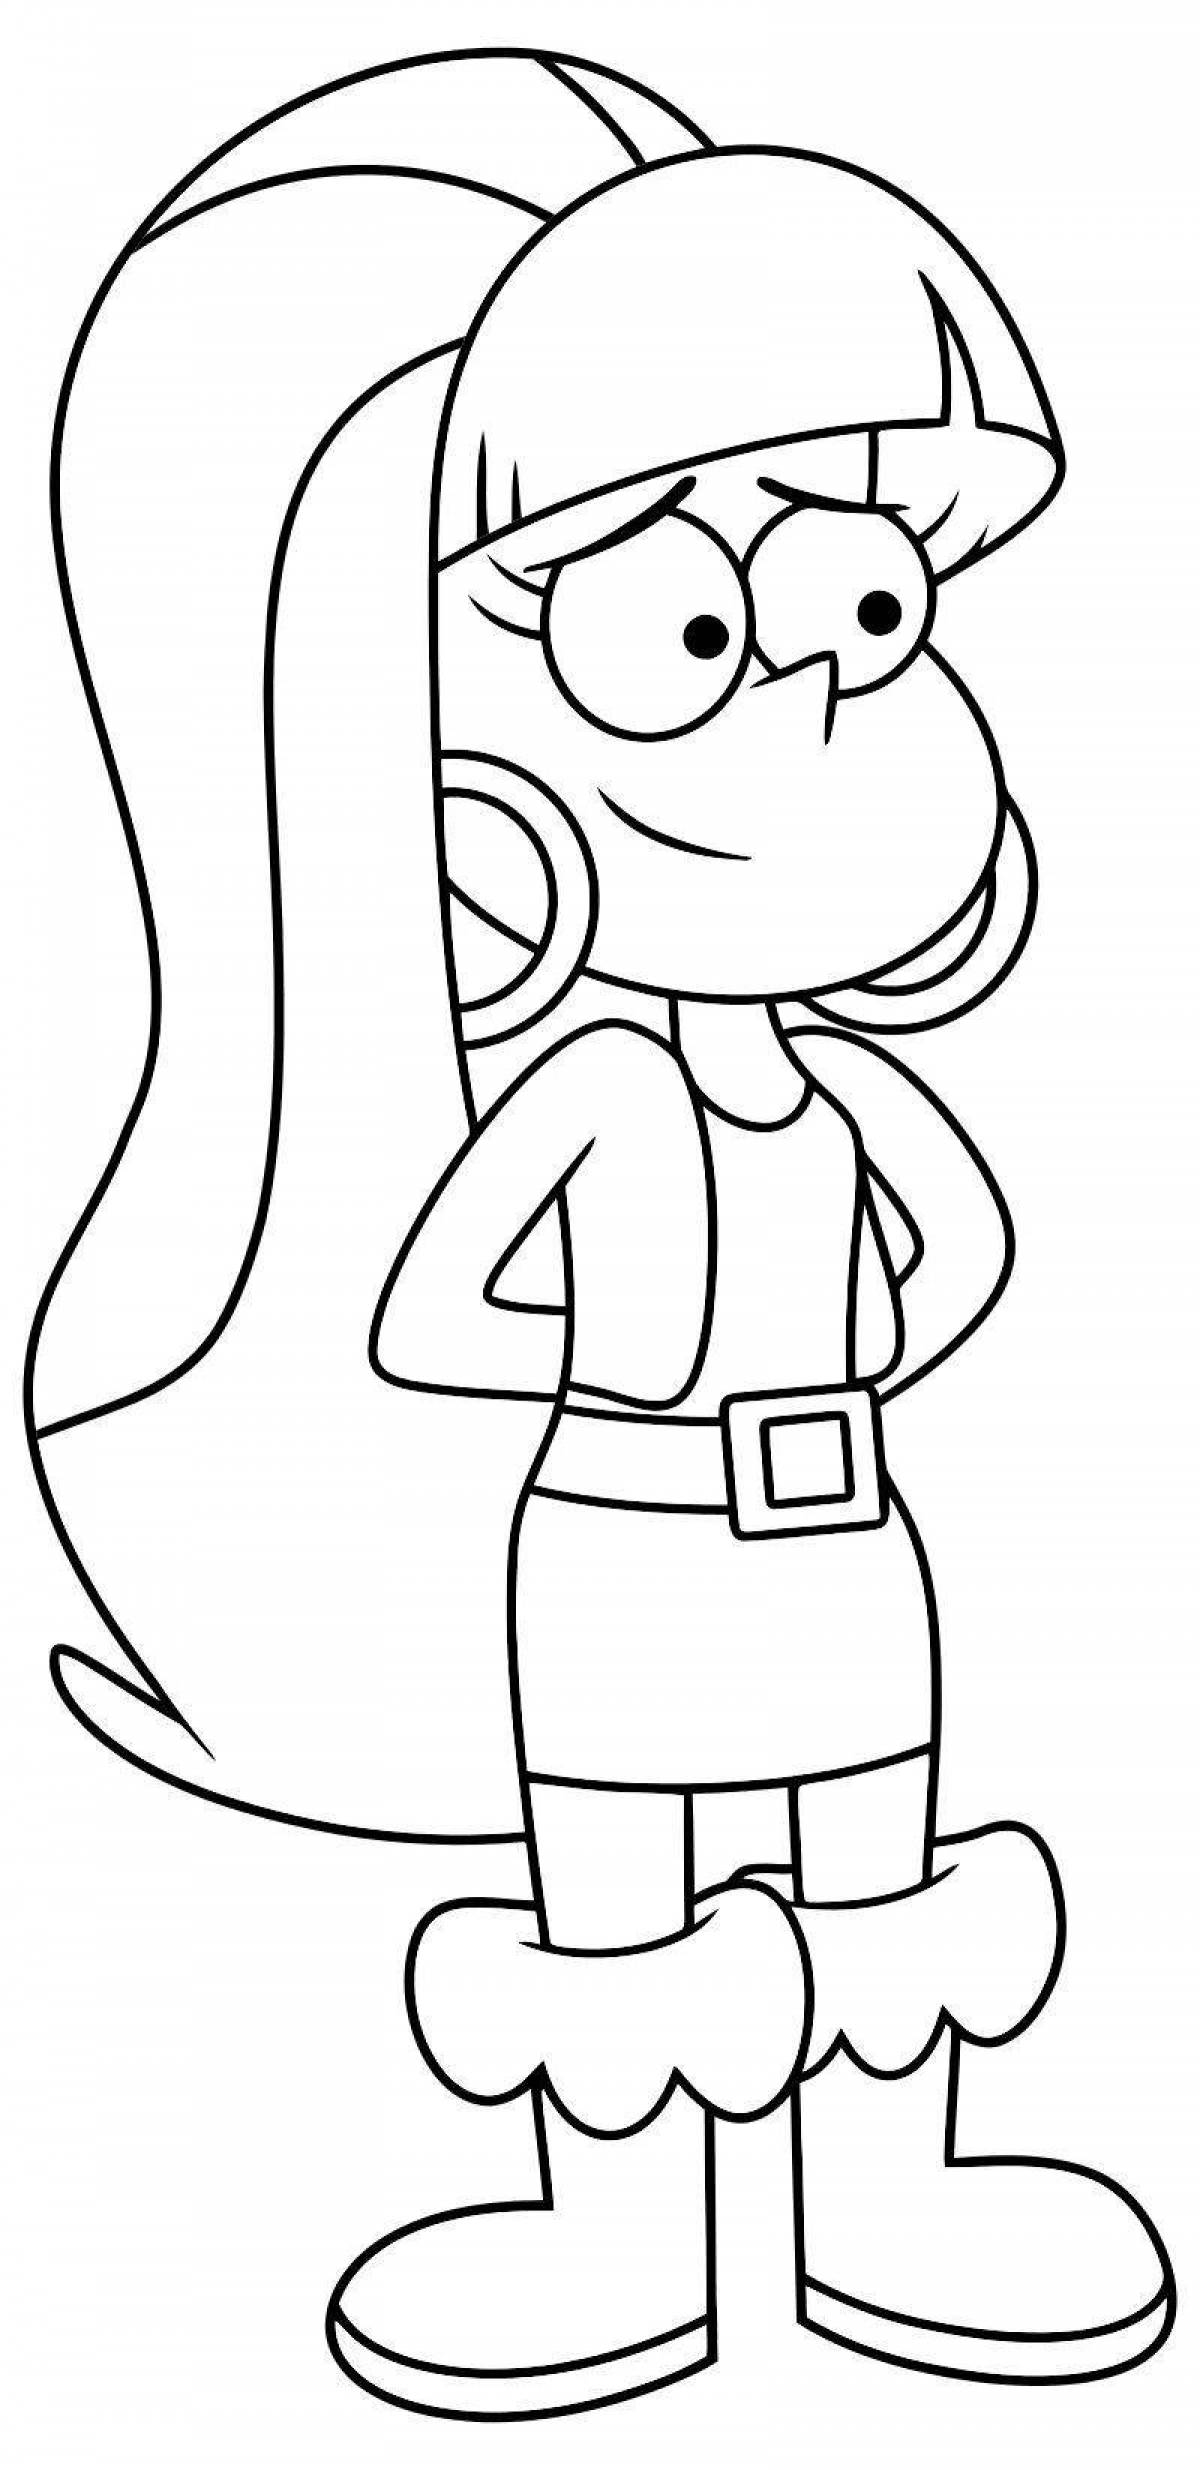 Mabel gravity falls live coloring page